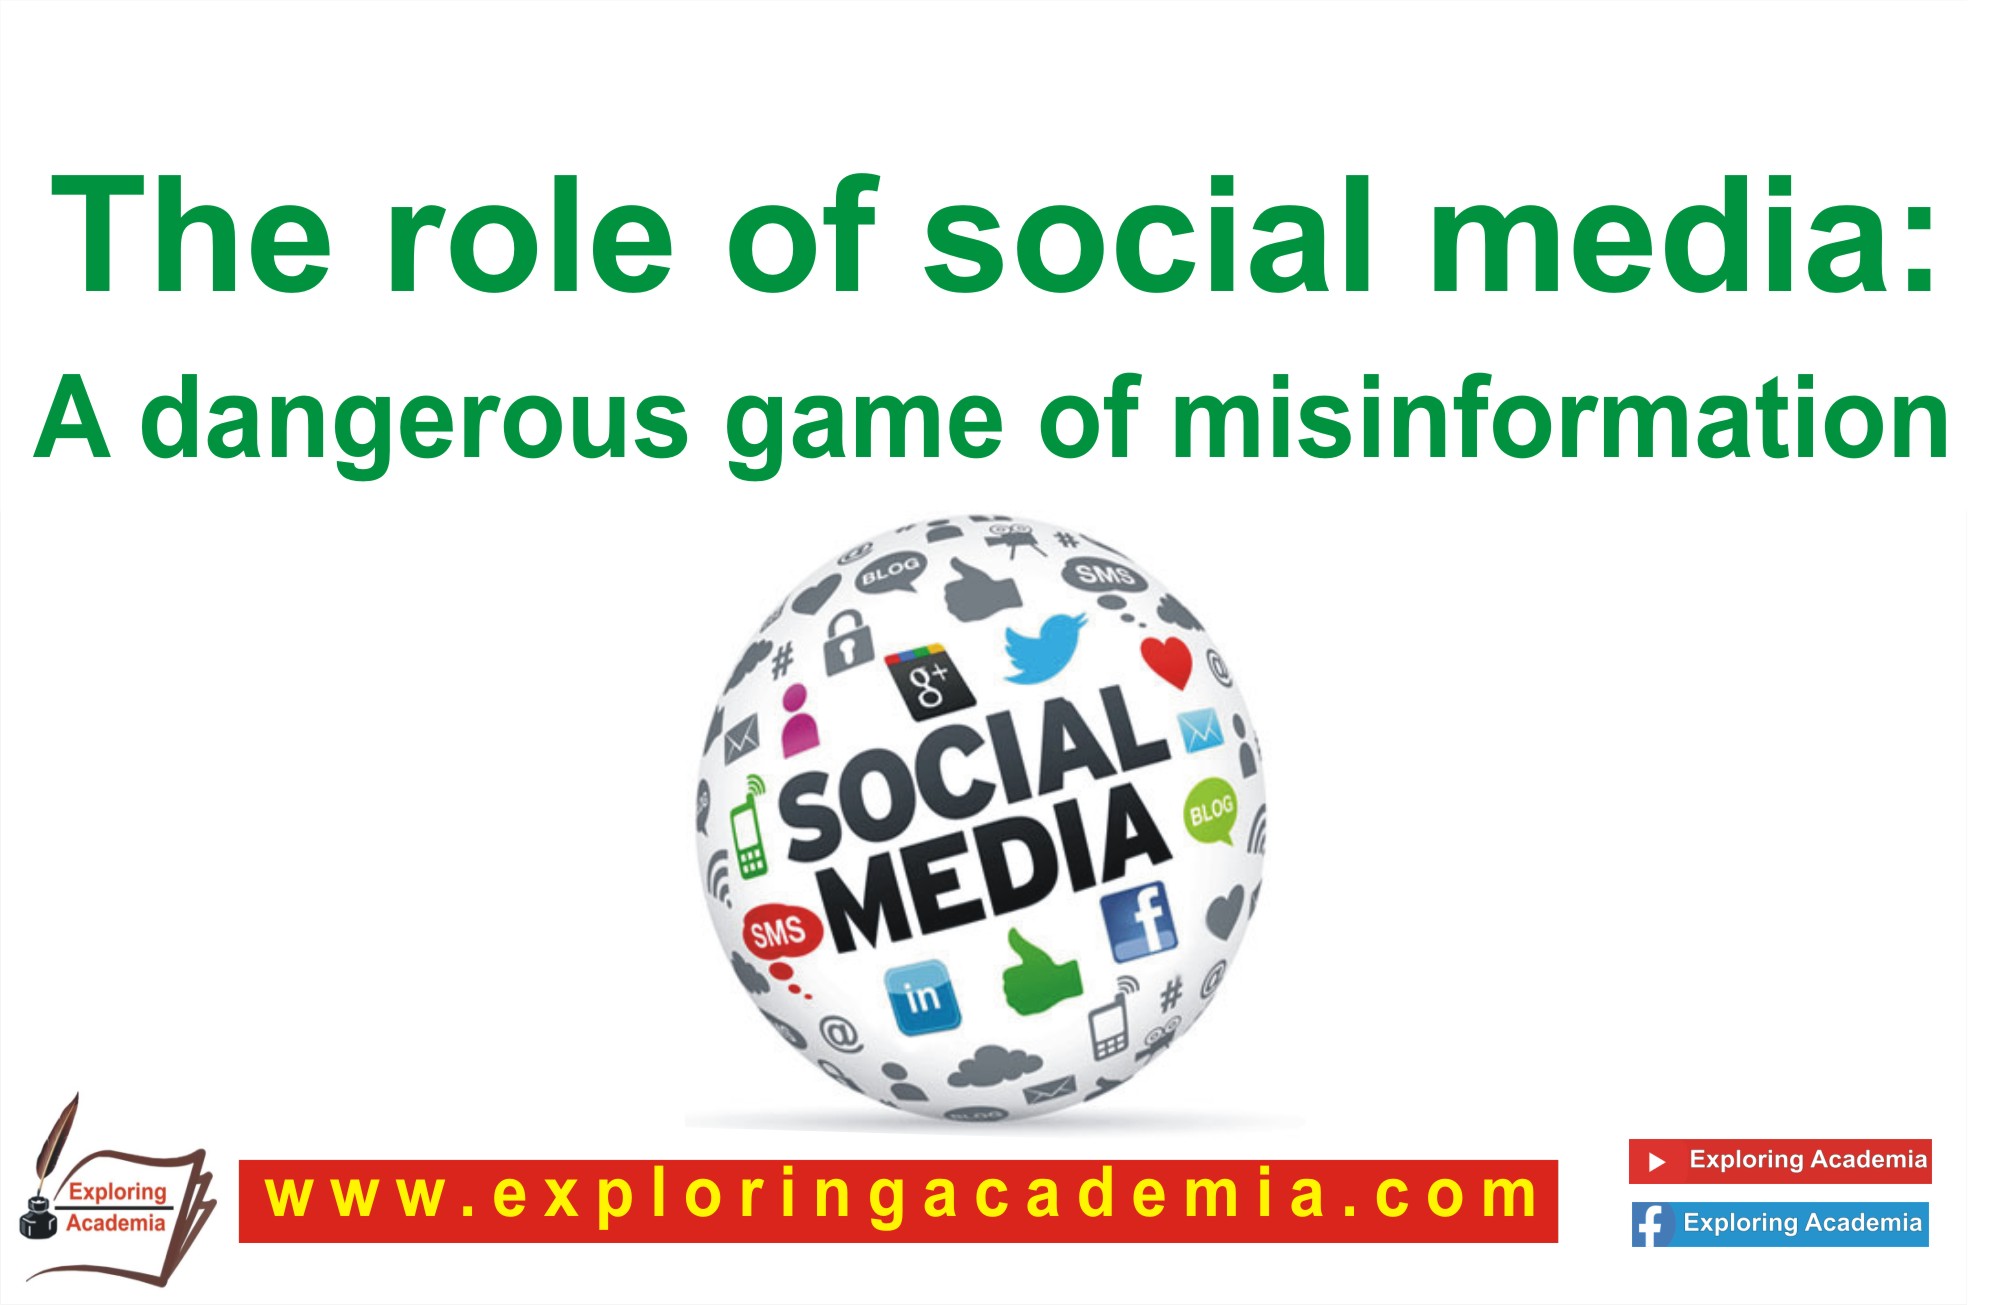 The role of social media: A dangerous game of misinformation